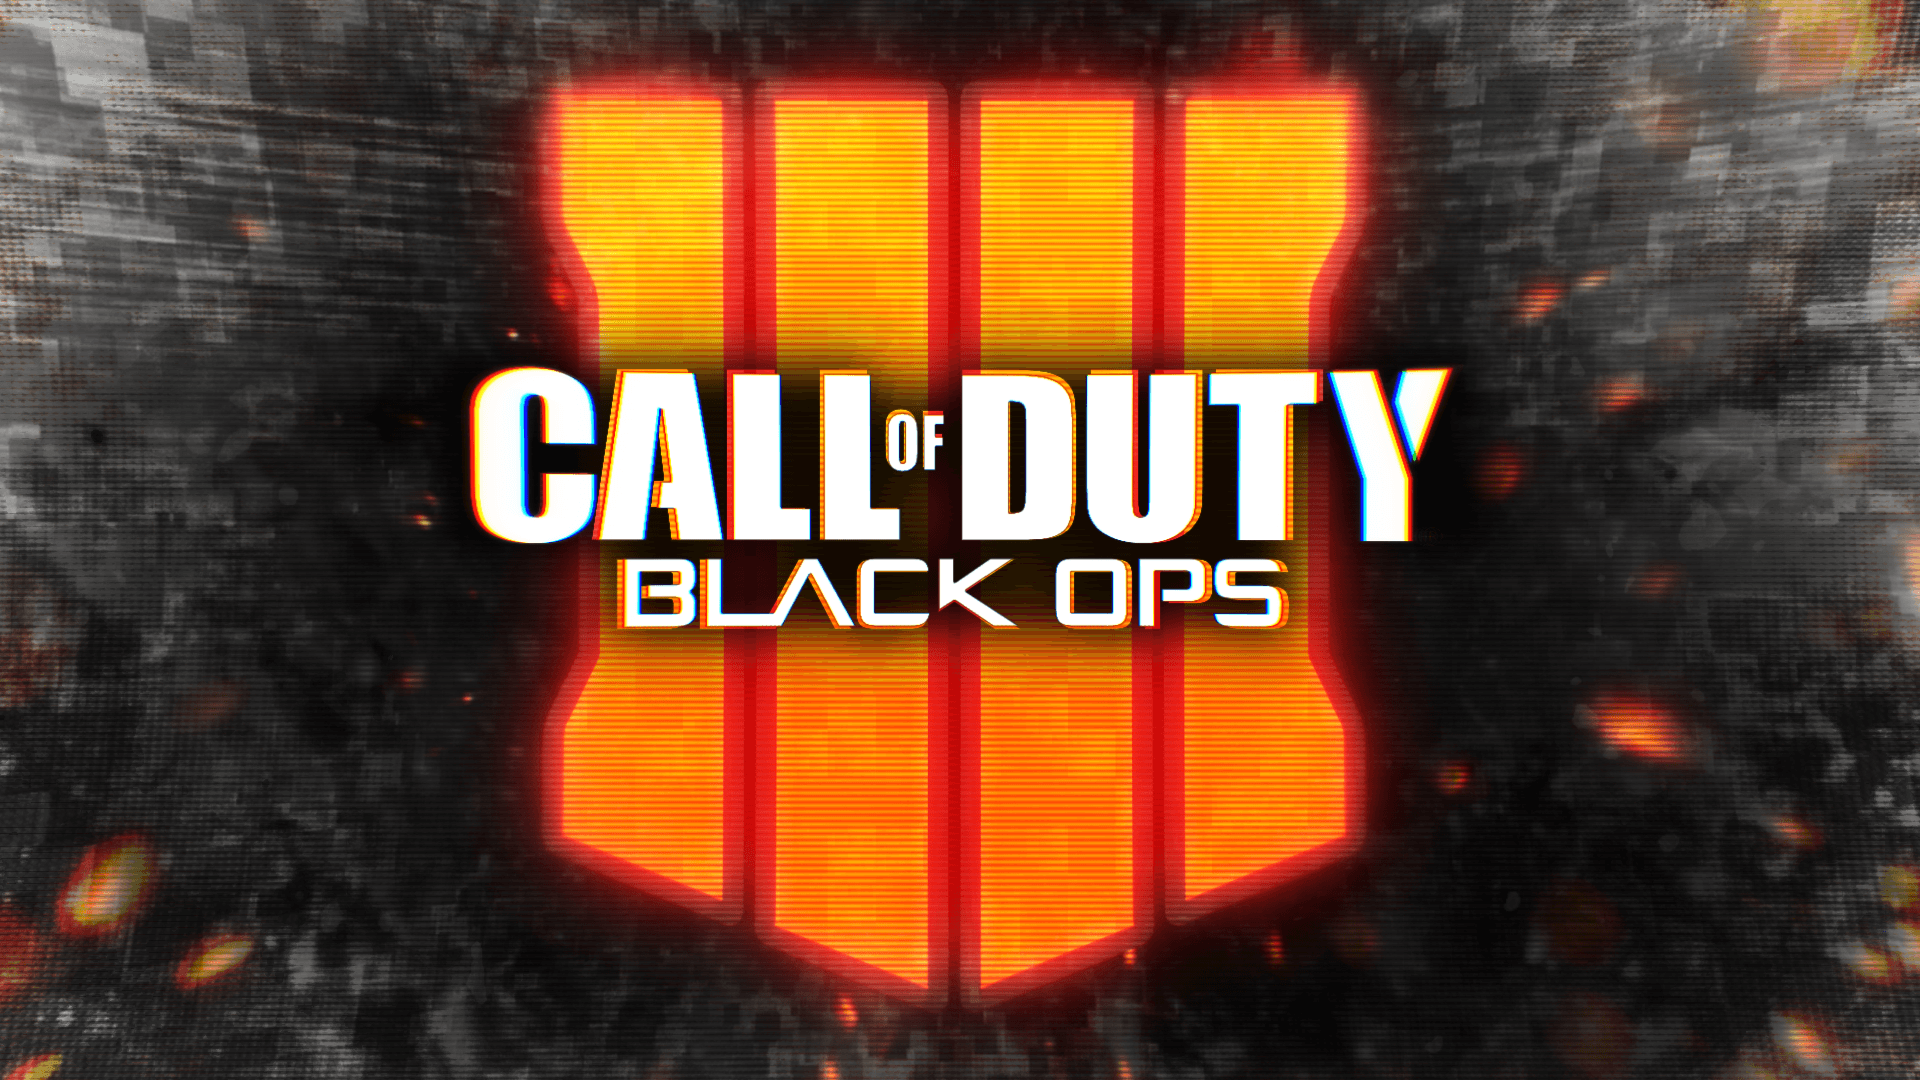 Call Of Duty Black Ops 4 Wallpaper Is Why Call Of Duty Black